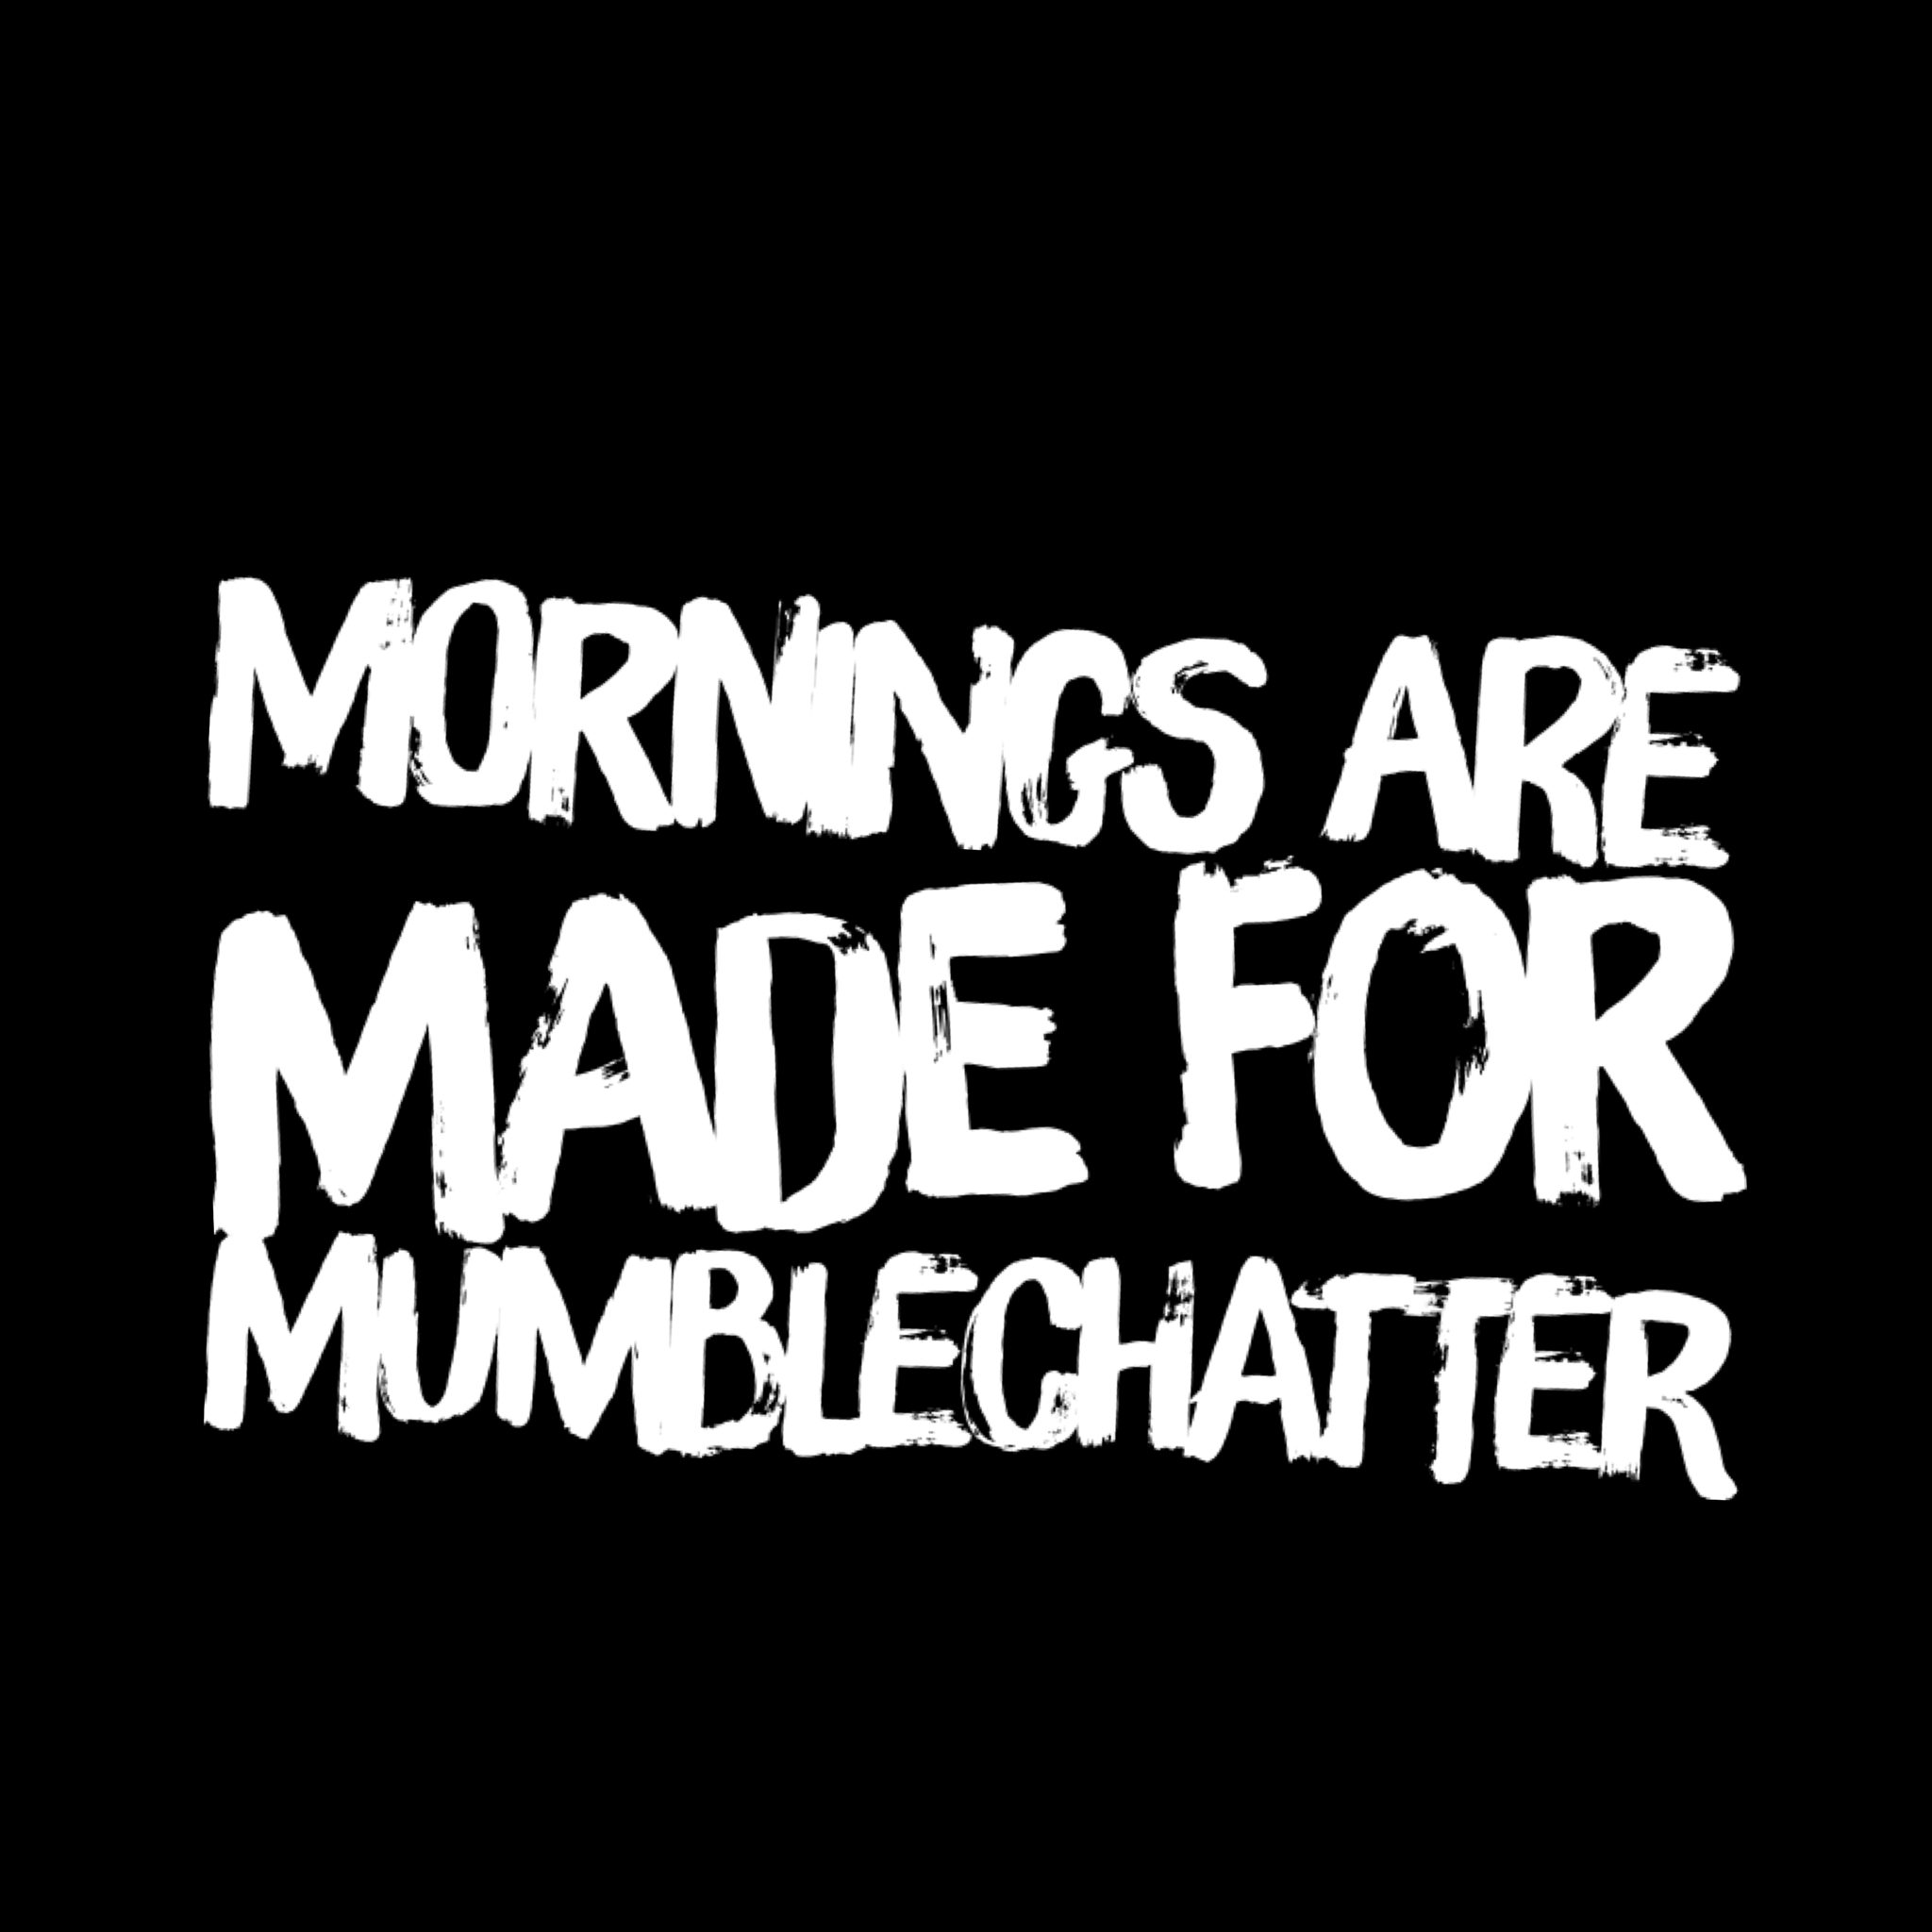 Mornings are Made for Mumblechatter